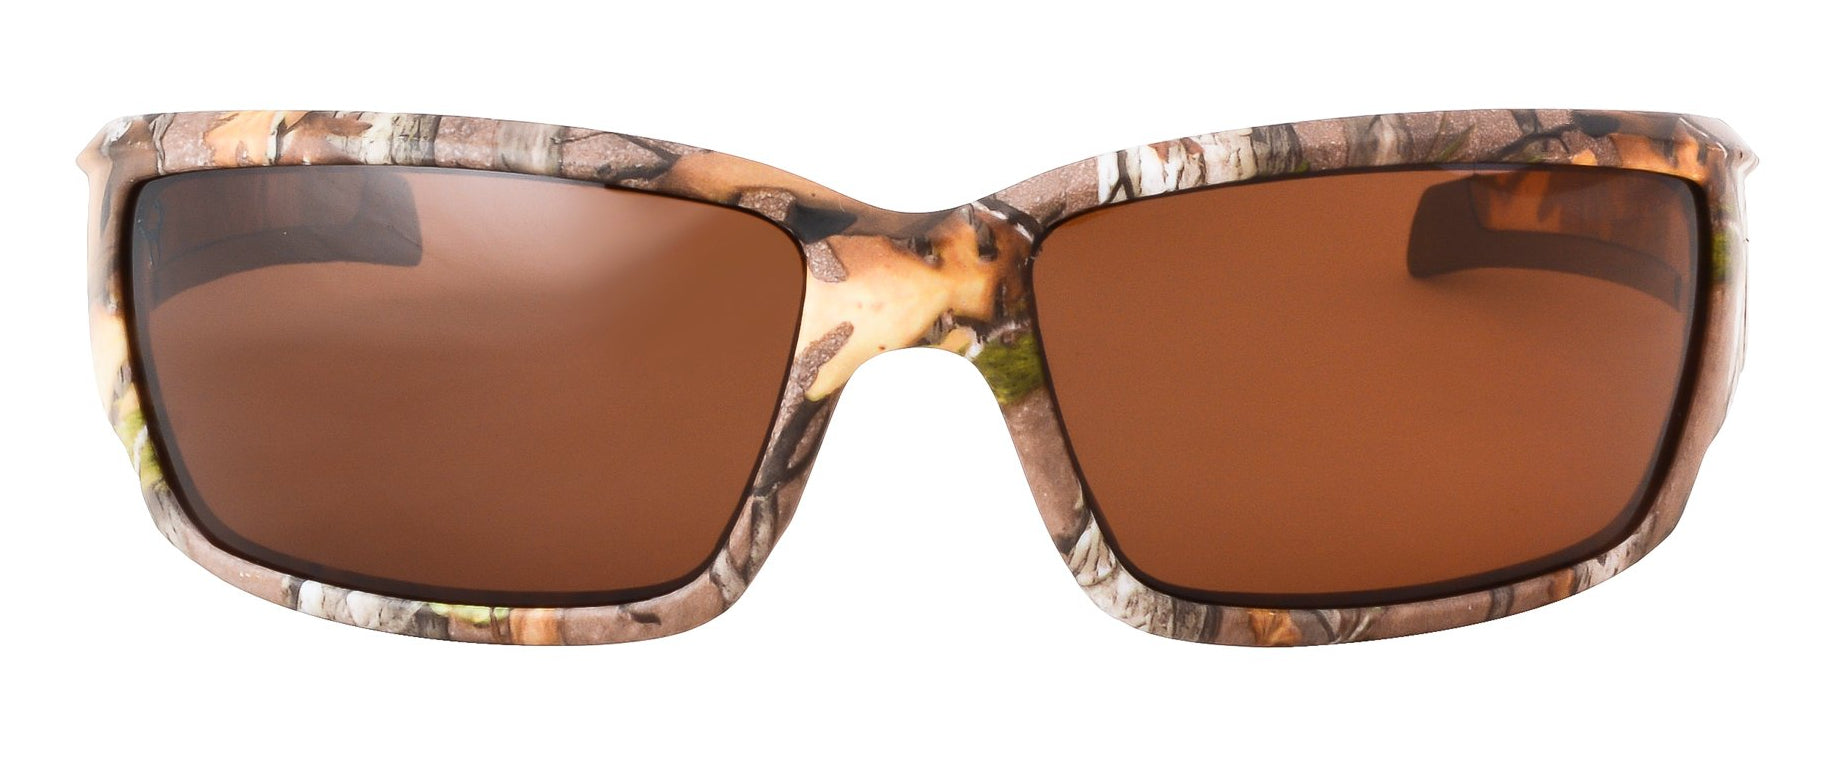 Third image: Hornz Brown Forest Camouflage Polarized Sunglasses for Men Full Frame Strong Arms & Free Matching Microfiber Pouch – Brown Camo Frame – Amber Lens